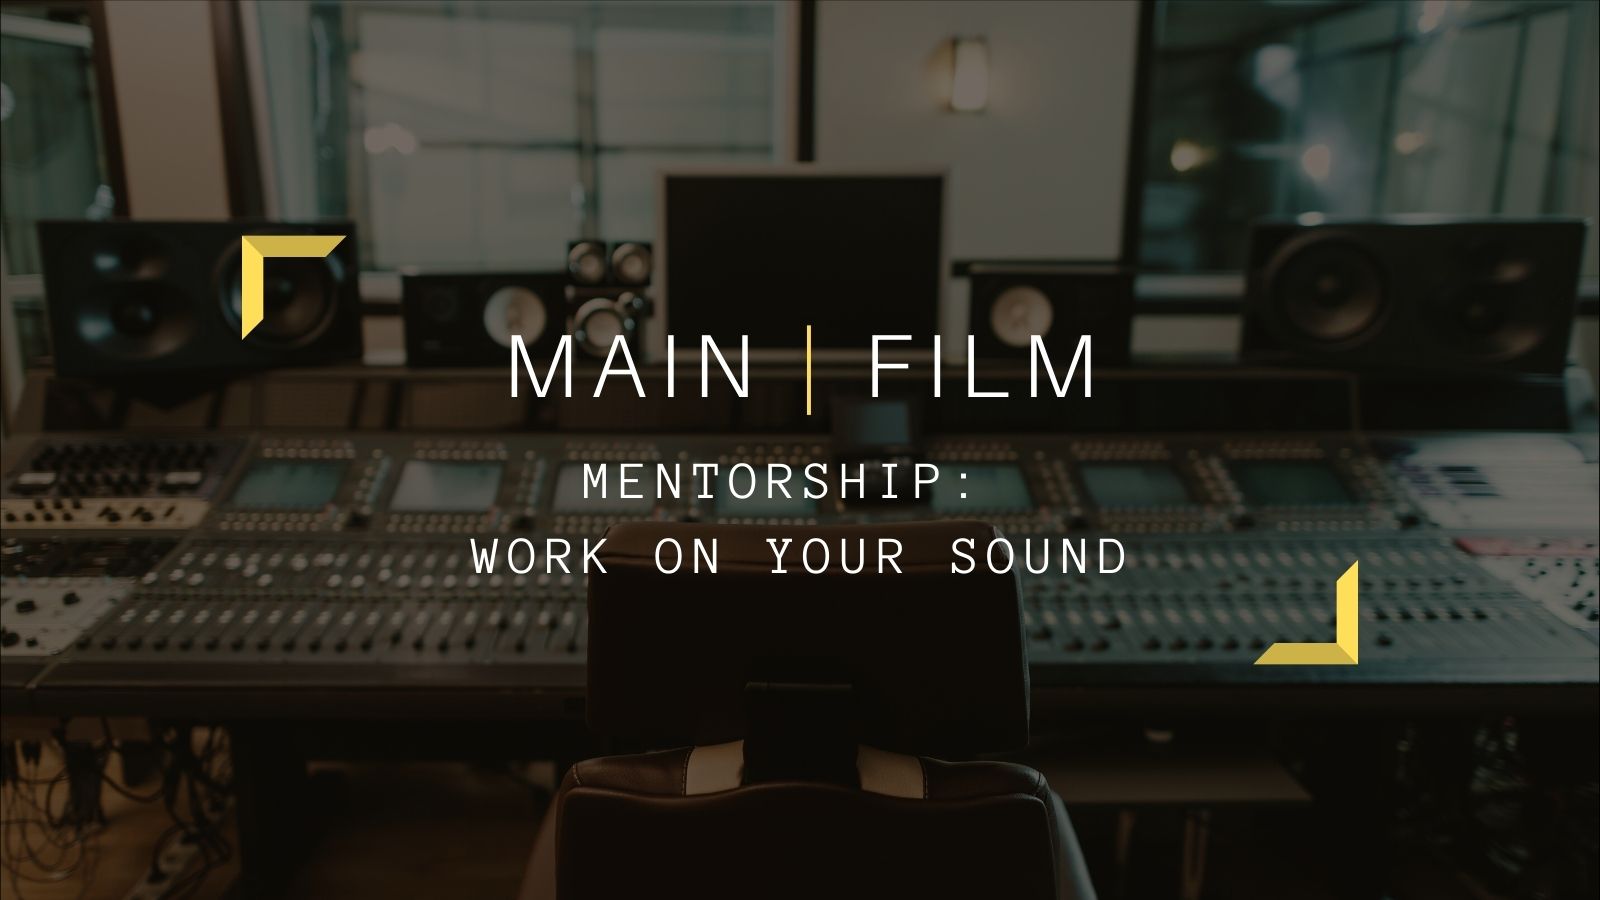 Mentoring application : Work on your sound | Online